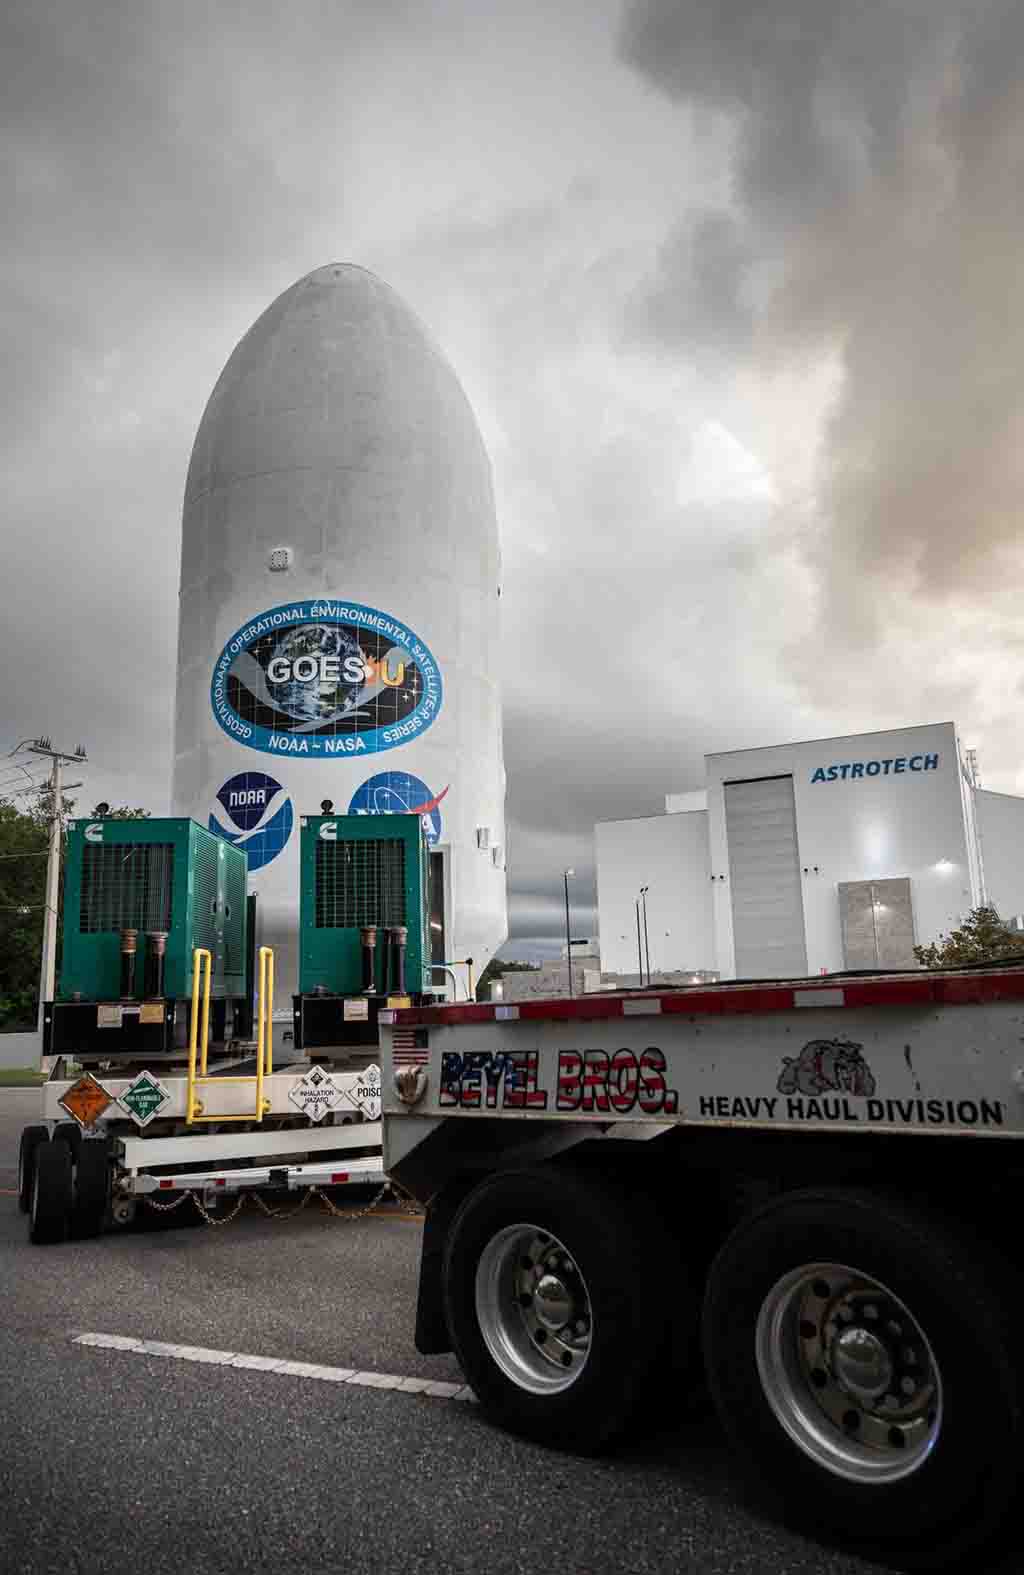 Crews transport NOAA’s GOES-U from the Astrotech Space Operations facility to the SpaceX hangar at Launch Complex 39A at NASA’s Kennedy Space Center in Florida